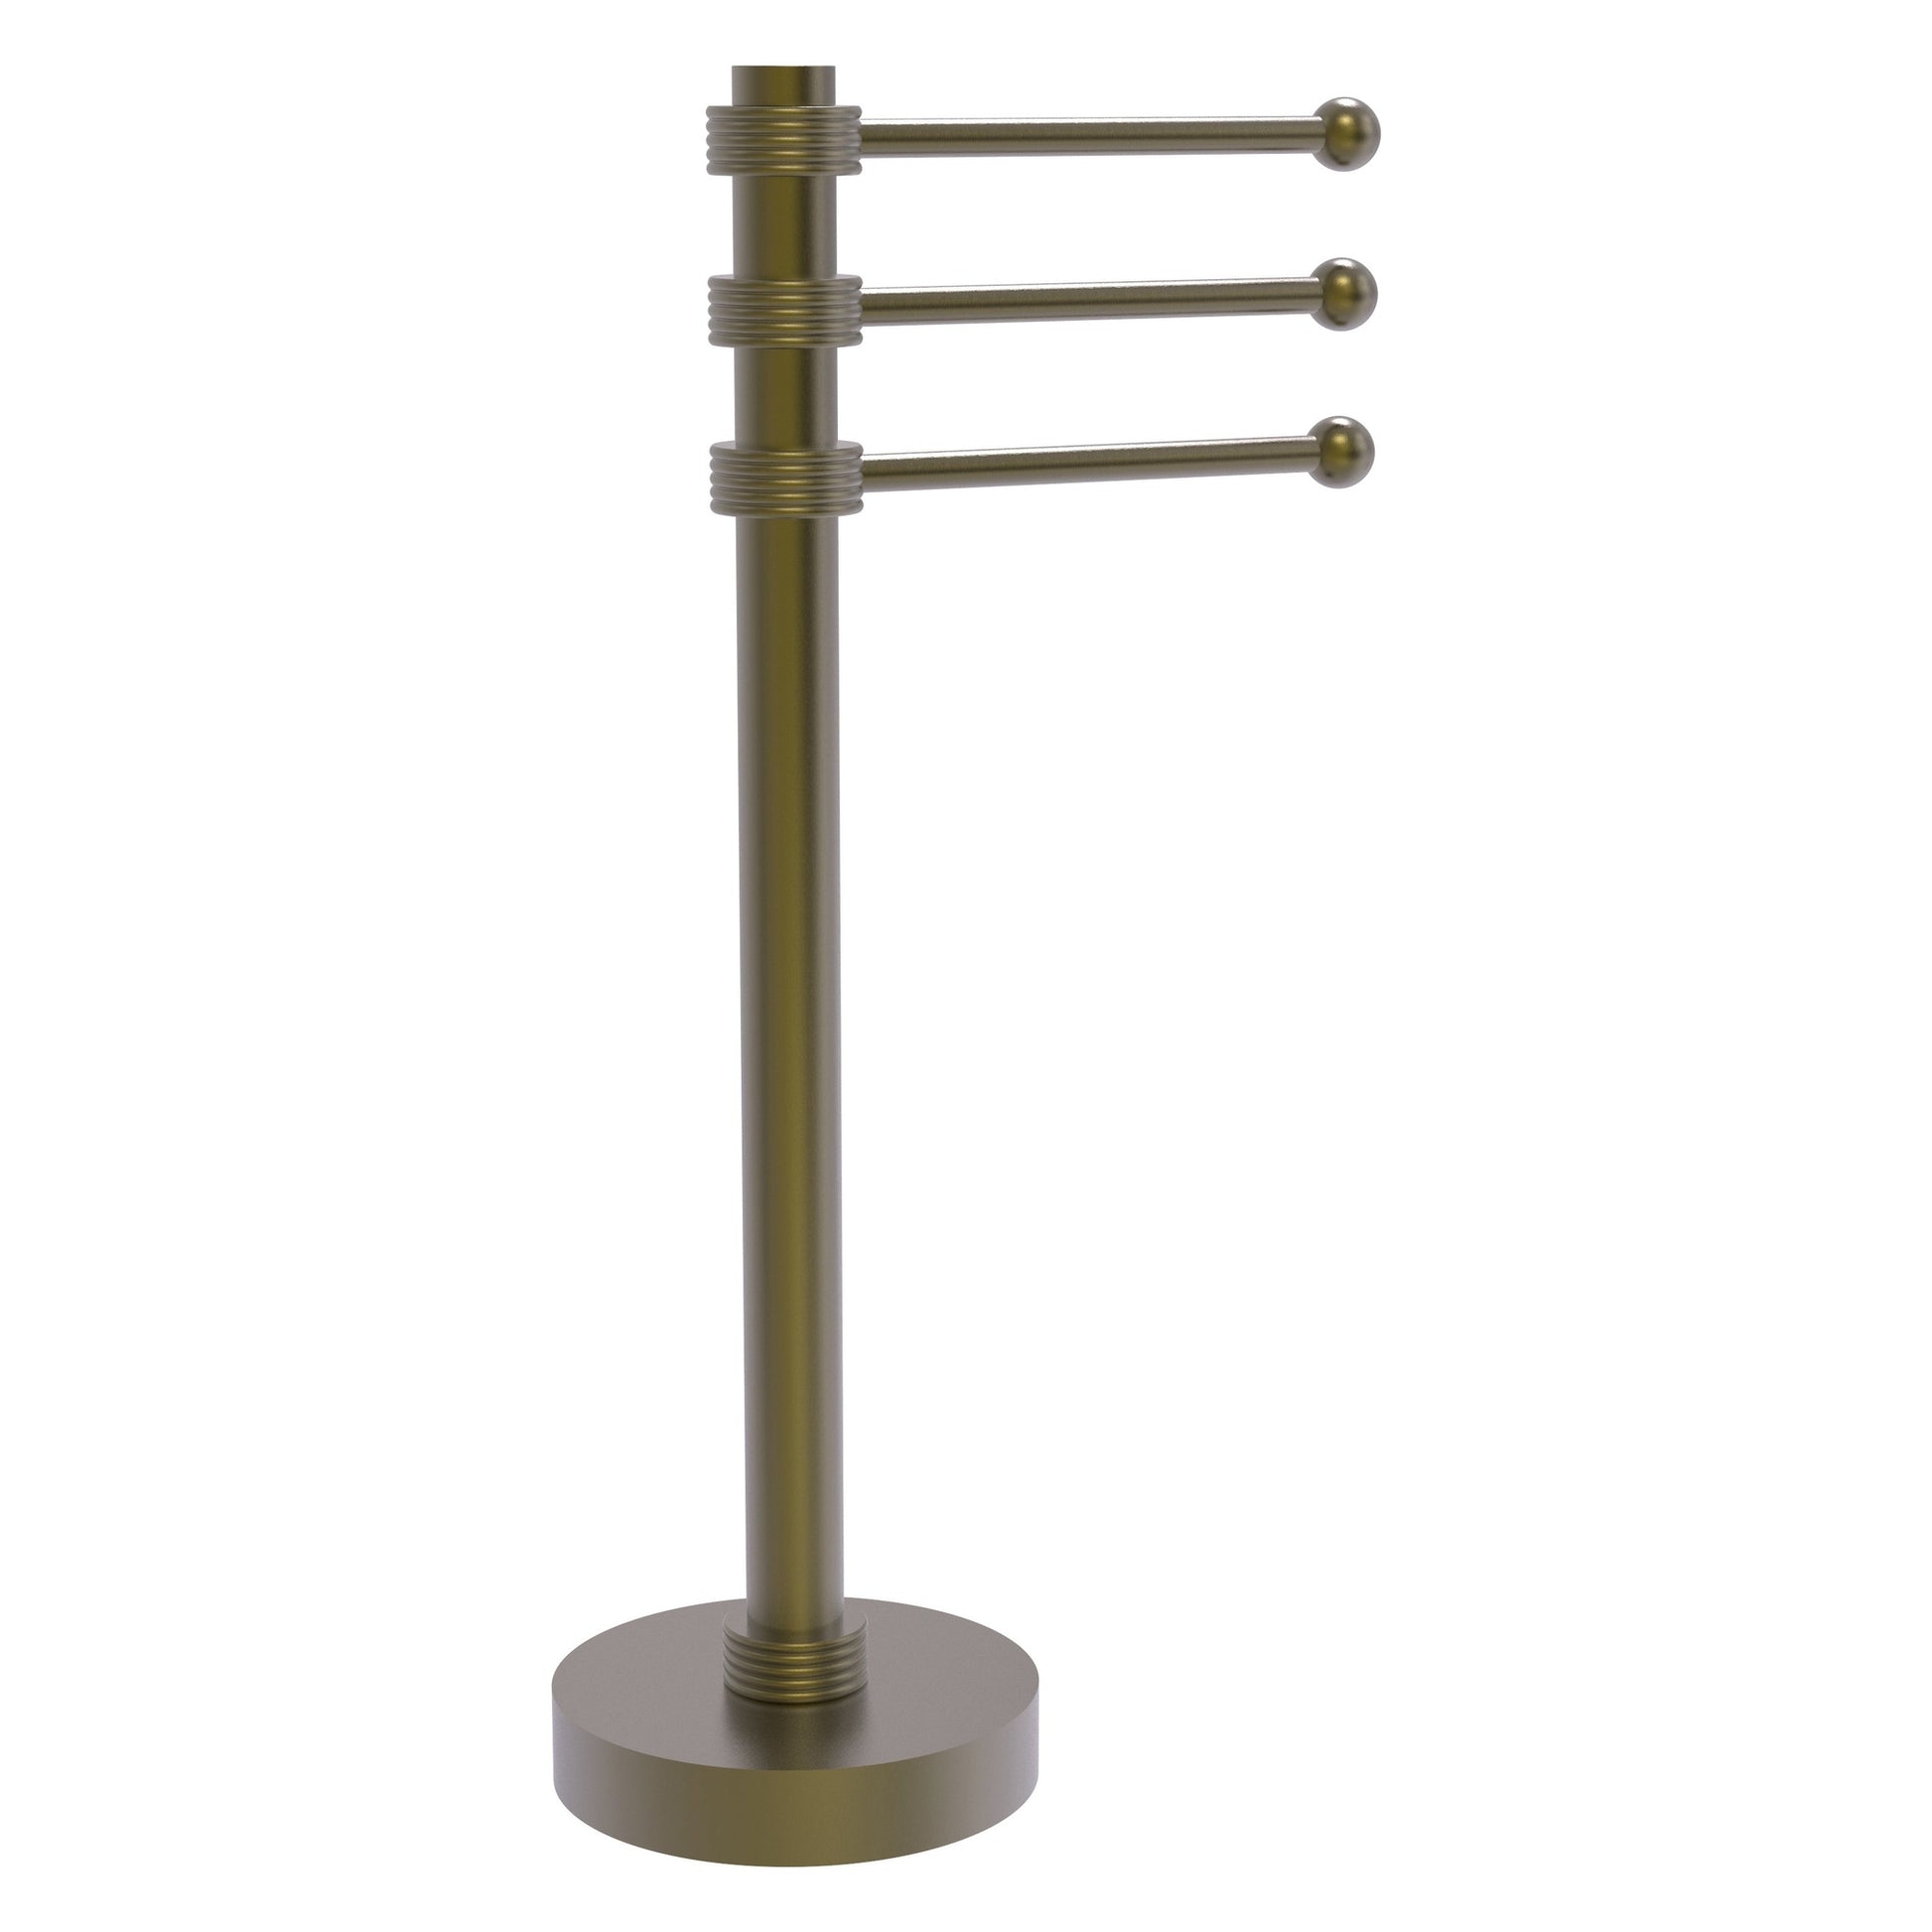 Allied Brass 973G 9" x 8" Antique Brass Solid Brass Vanity Top 3-Swing Arm Guest Towel Holder With Grooved Accents